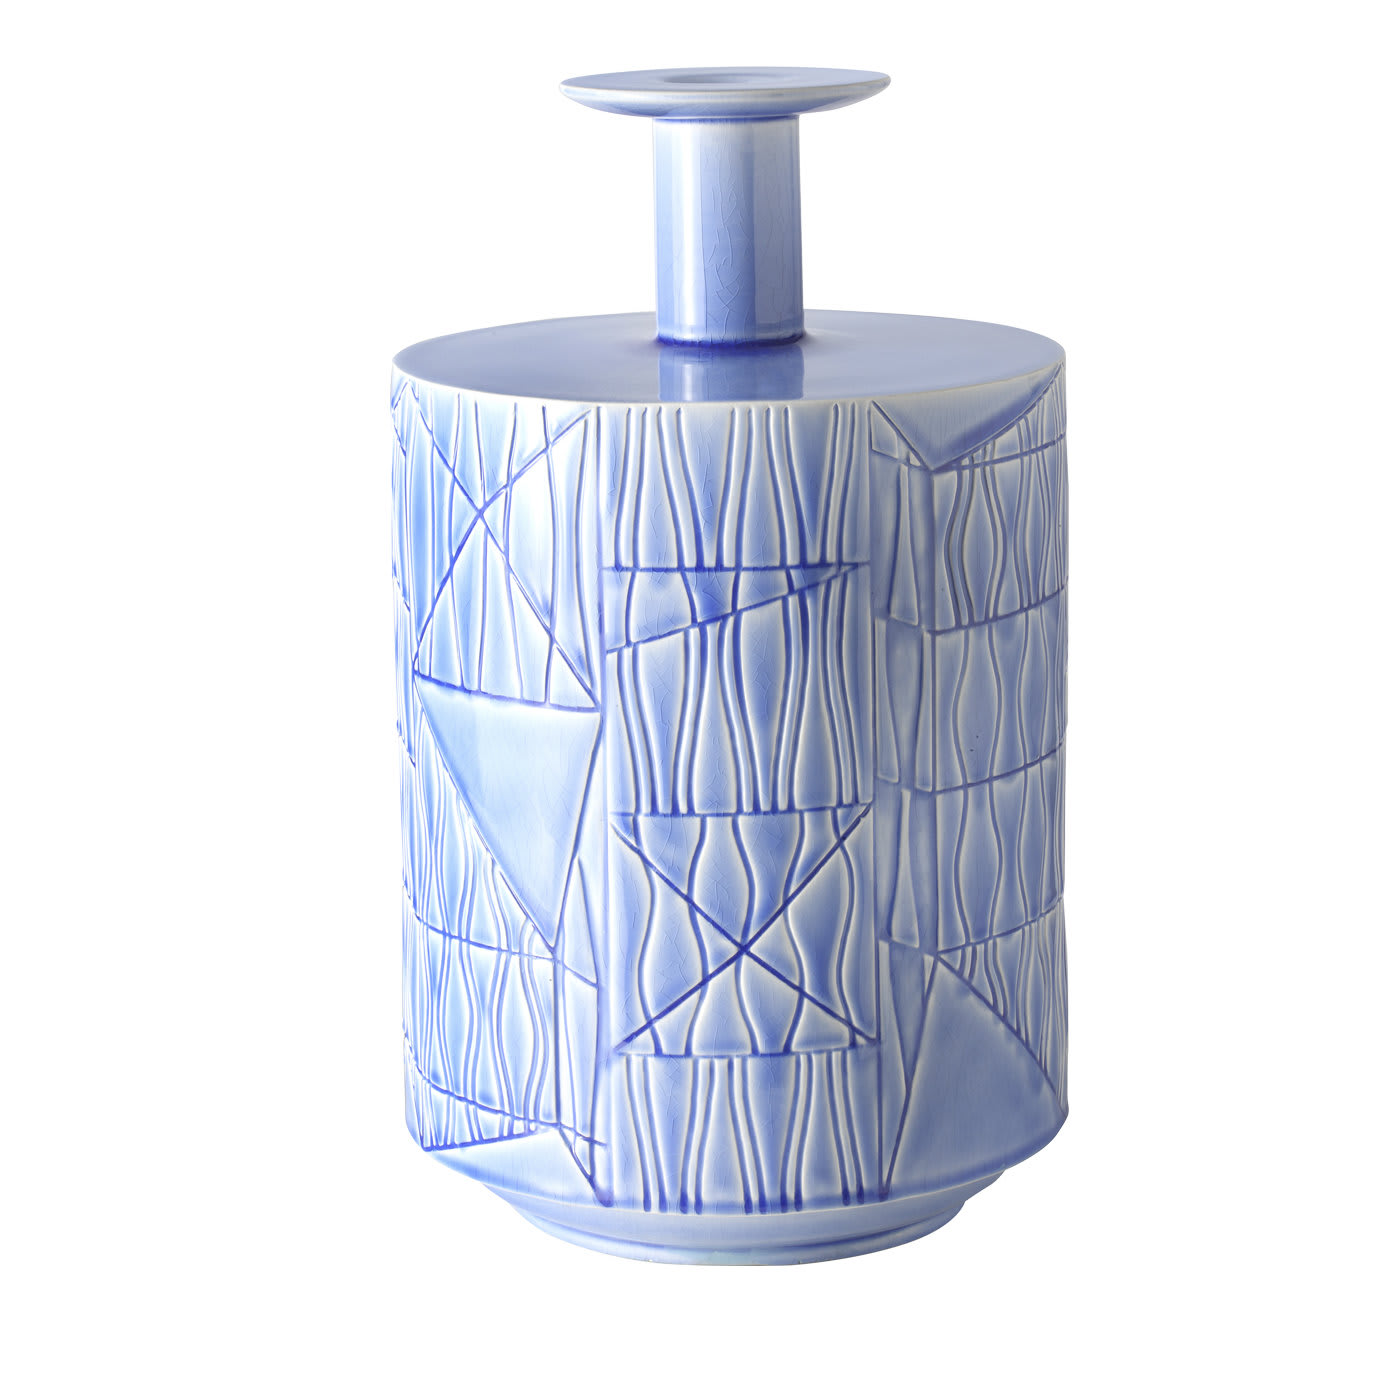 Pale Blue Vase by Bethan Laura Wood - Bitossi Ceramiche